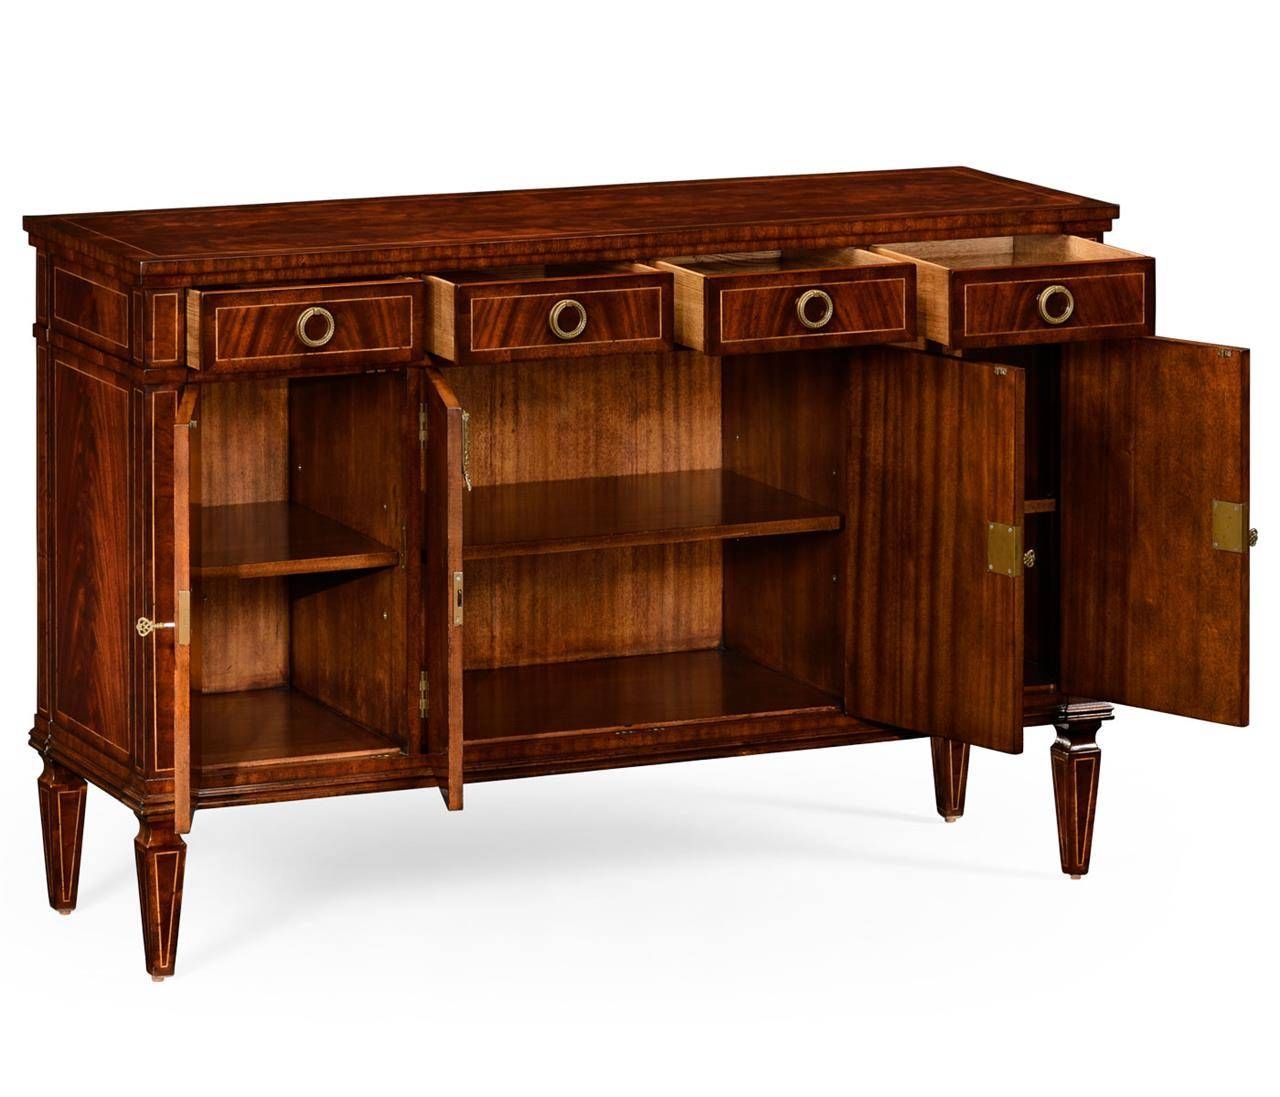 Luxurious Mahogany Sideboard With Inlay Intended For Most Popular Mahogany Sideboards Buffets (View 14 of 15)